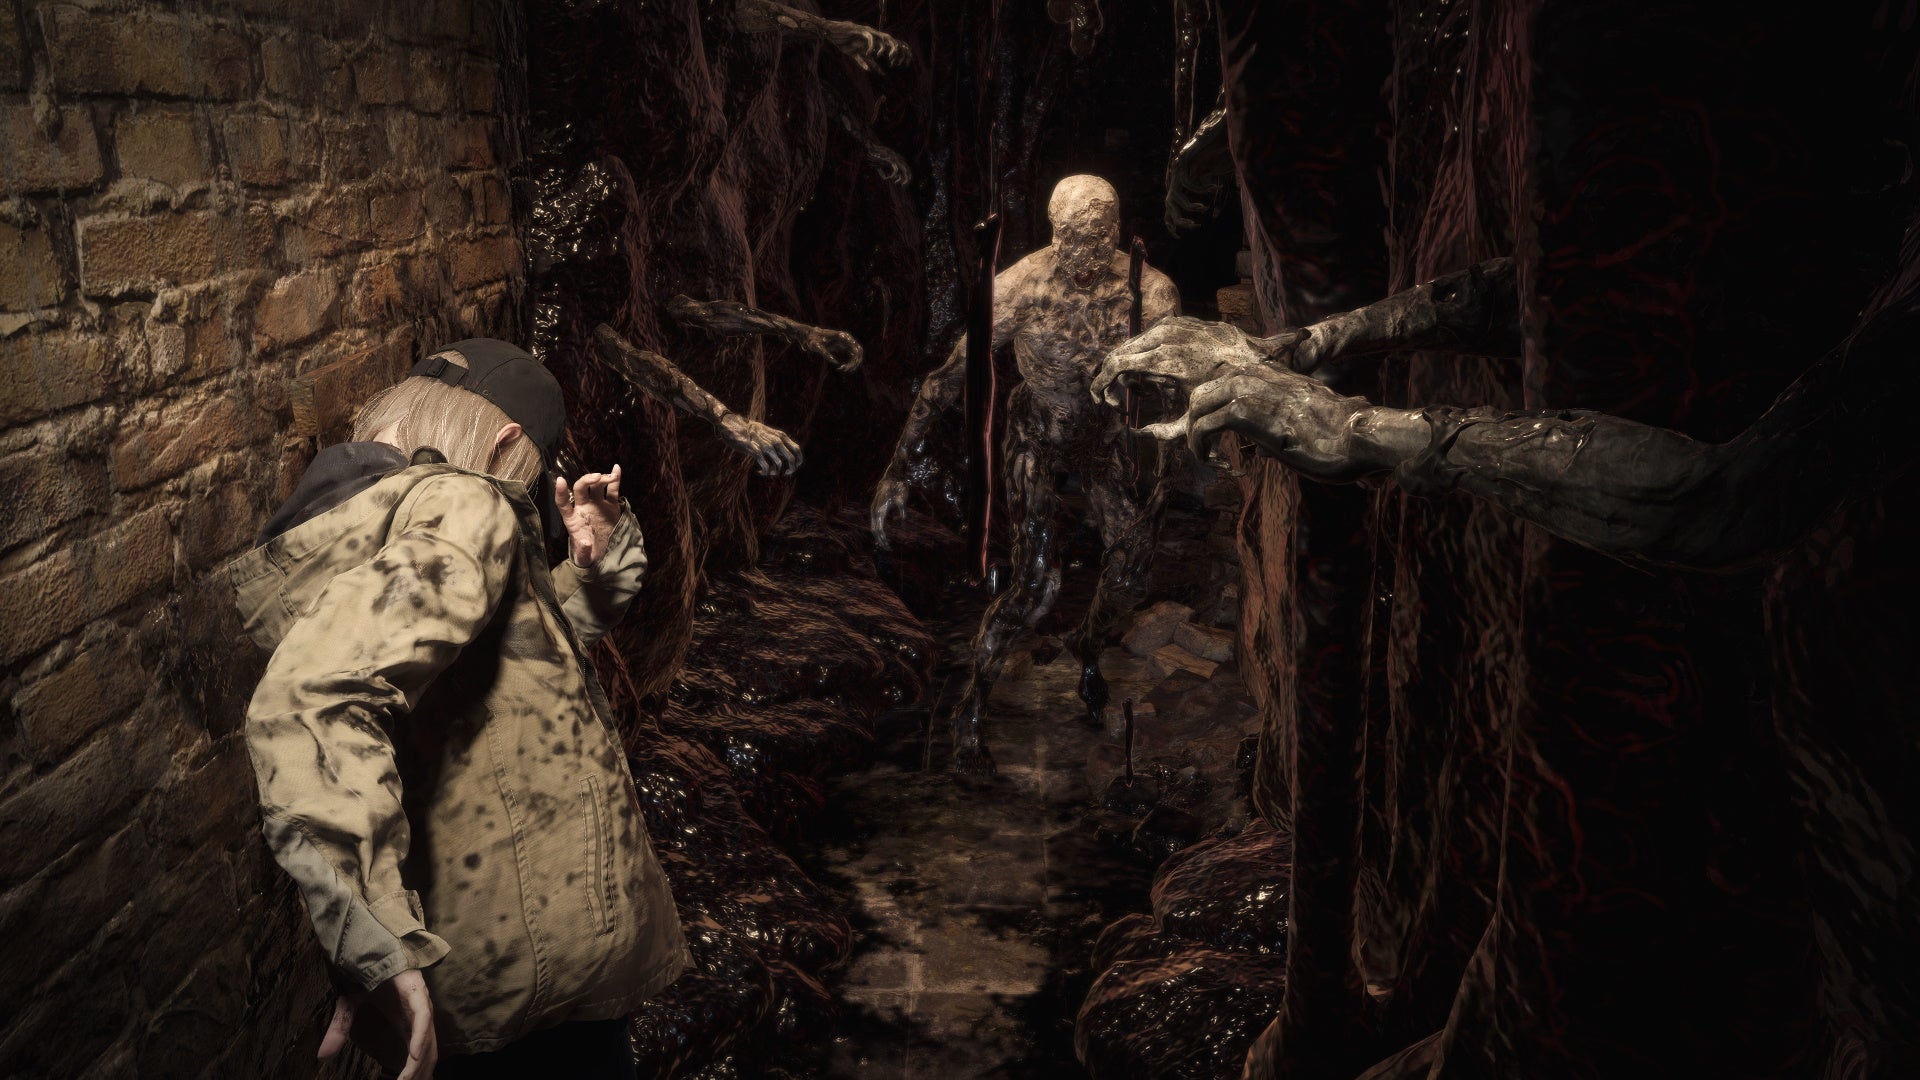 A blone-haired girl stumbles through muck and gore in a narrow corridor with a zombie in front of her in Resident Evil Village's Shadows Of Rose DLC